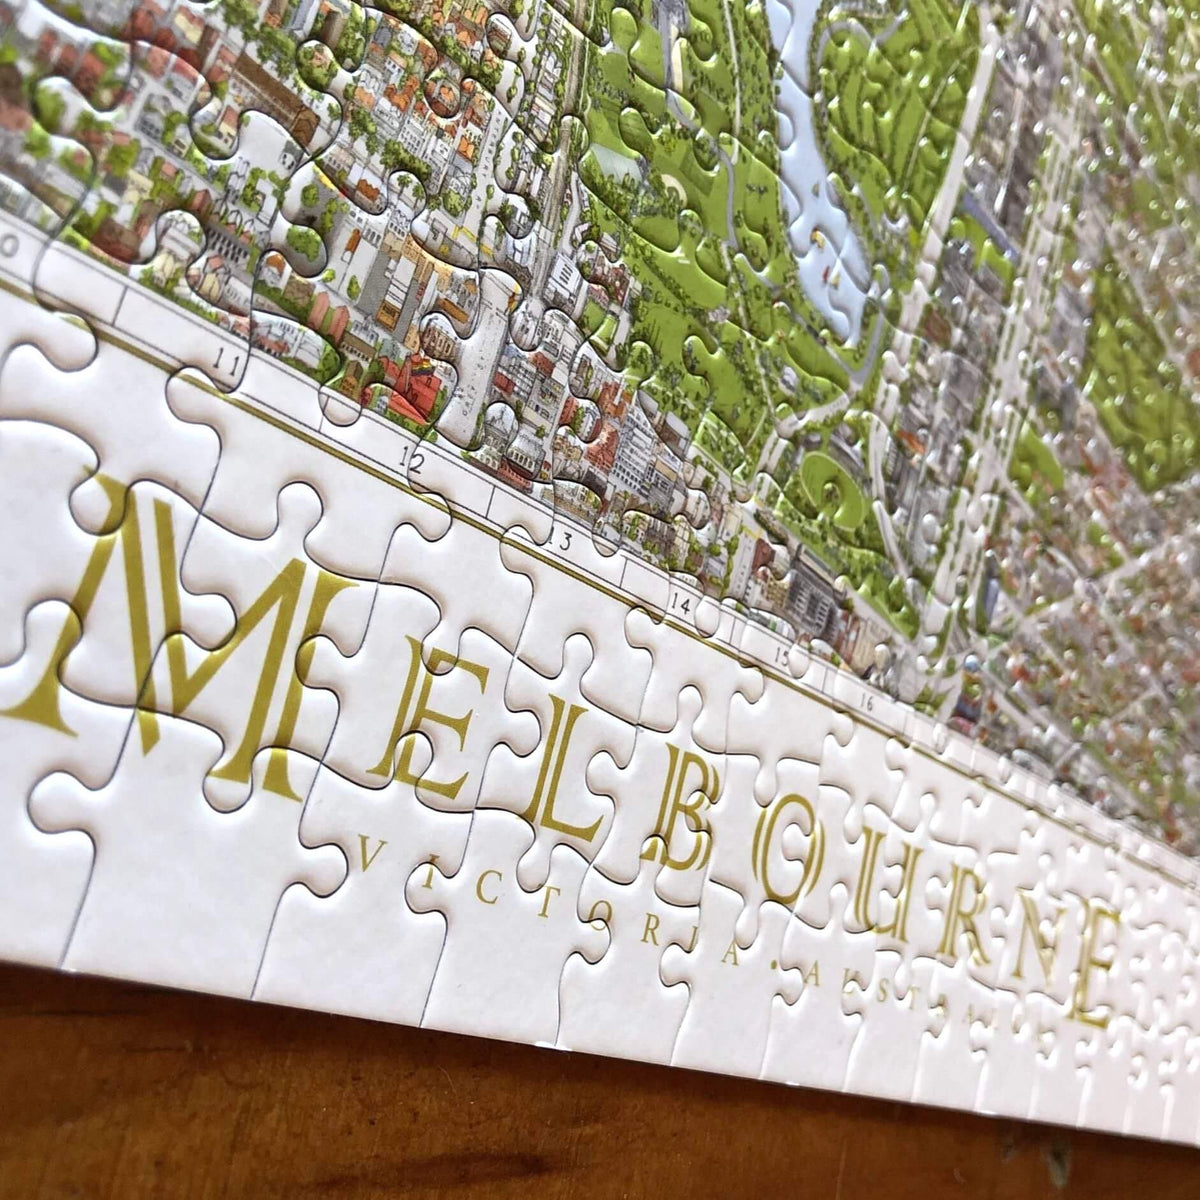 The Melbourne Map 1,000-piece jigsaw puzzle completed on a natural timber table. Close-up of the &quot;Melbourne&quot; pieces